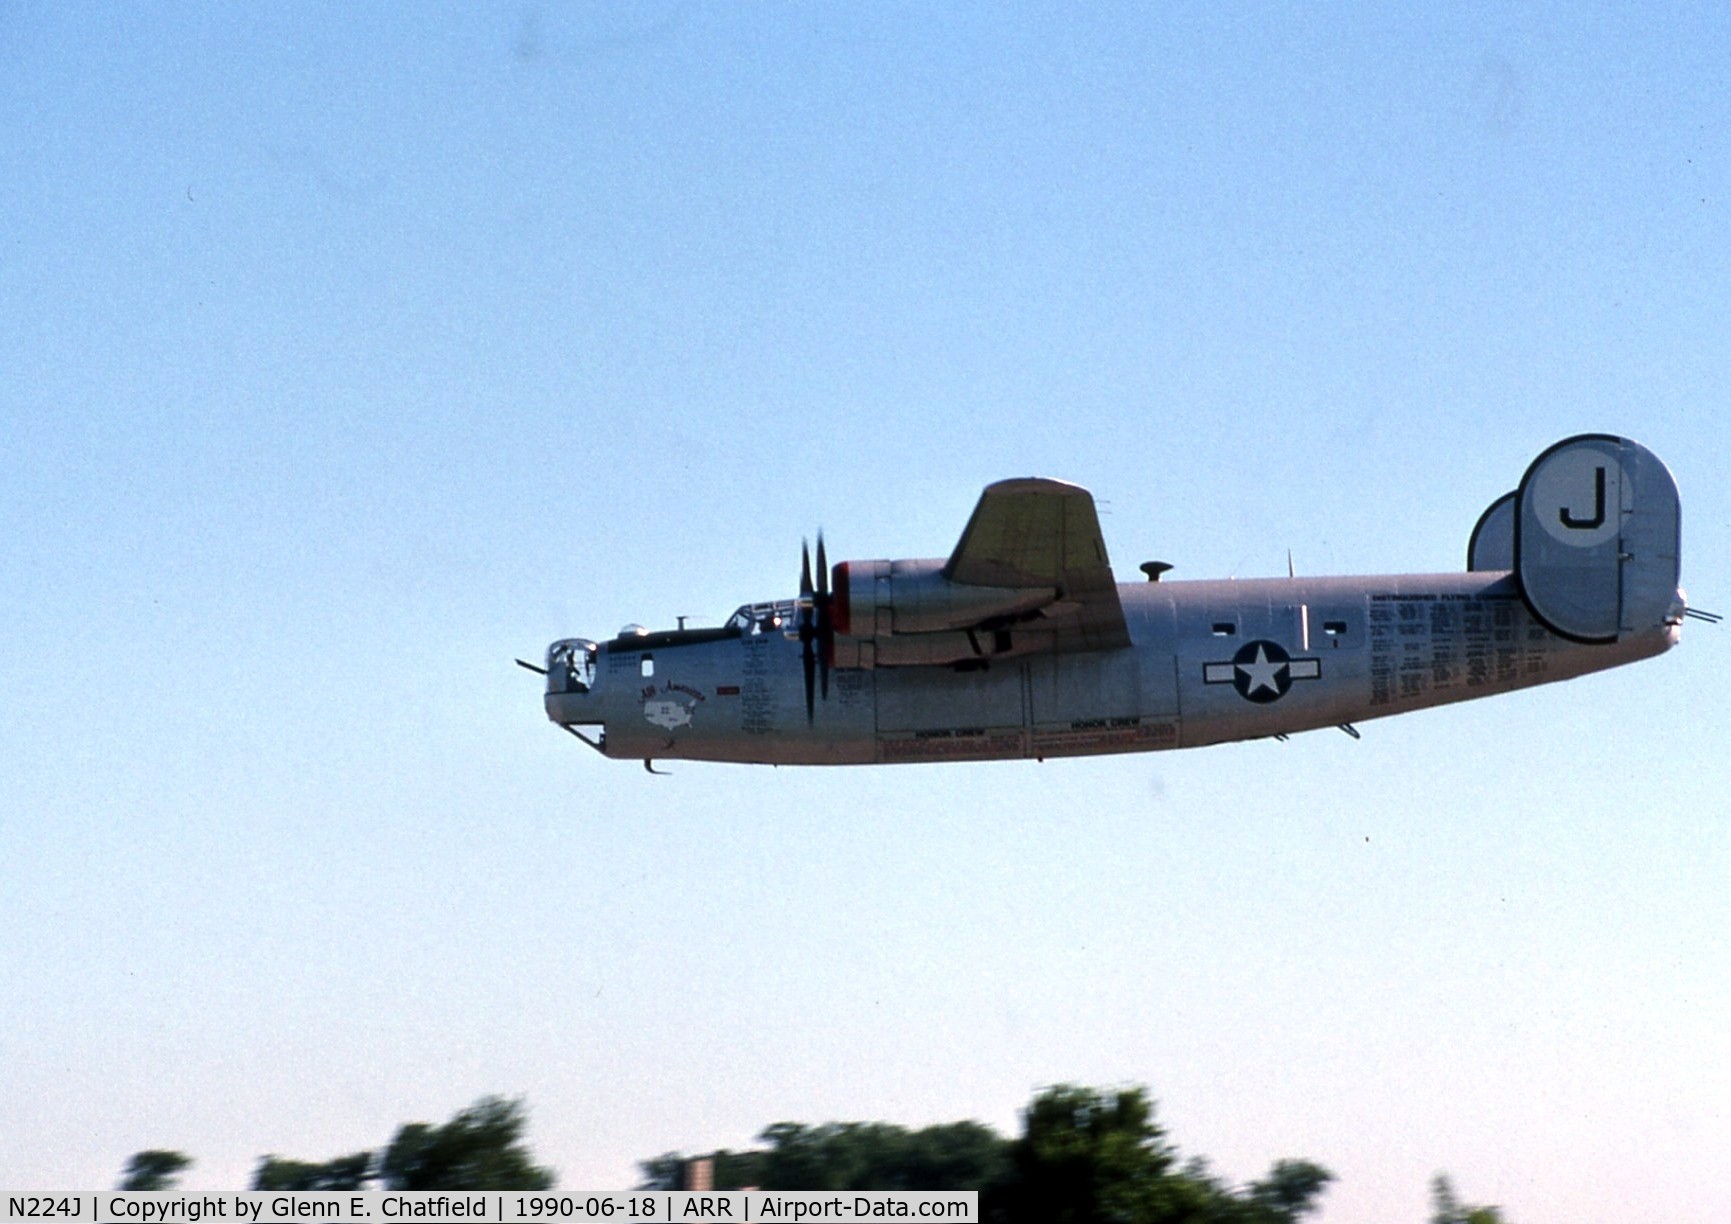 N224J, 1944 Consolidated B-24J-85-CF Liberator C/N 1347 (44-44052), Flying by the audience